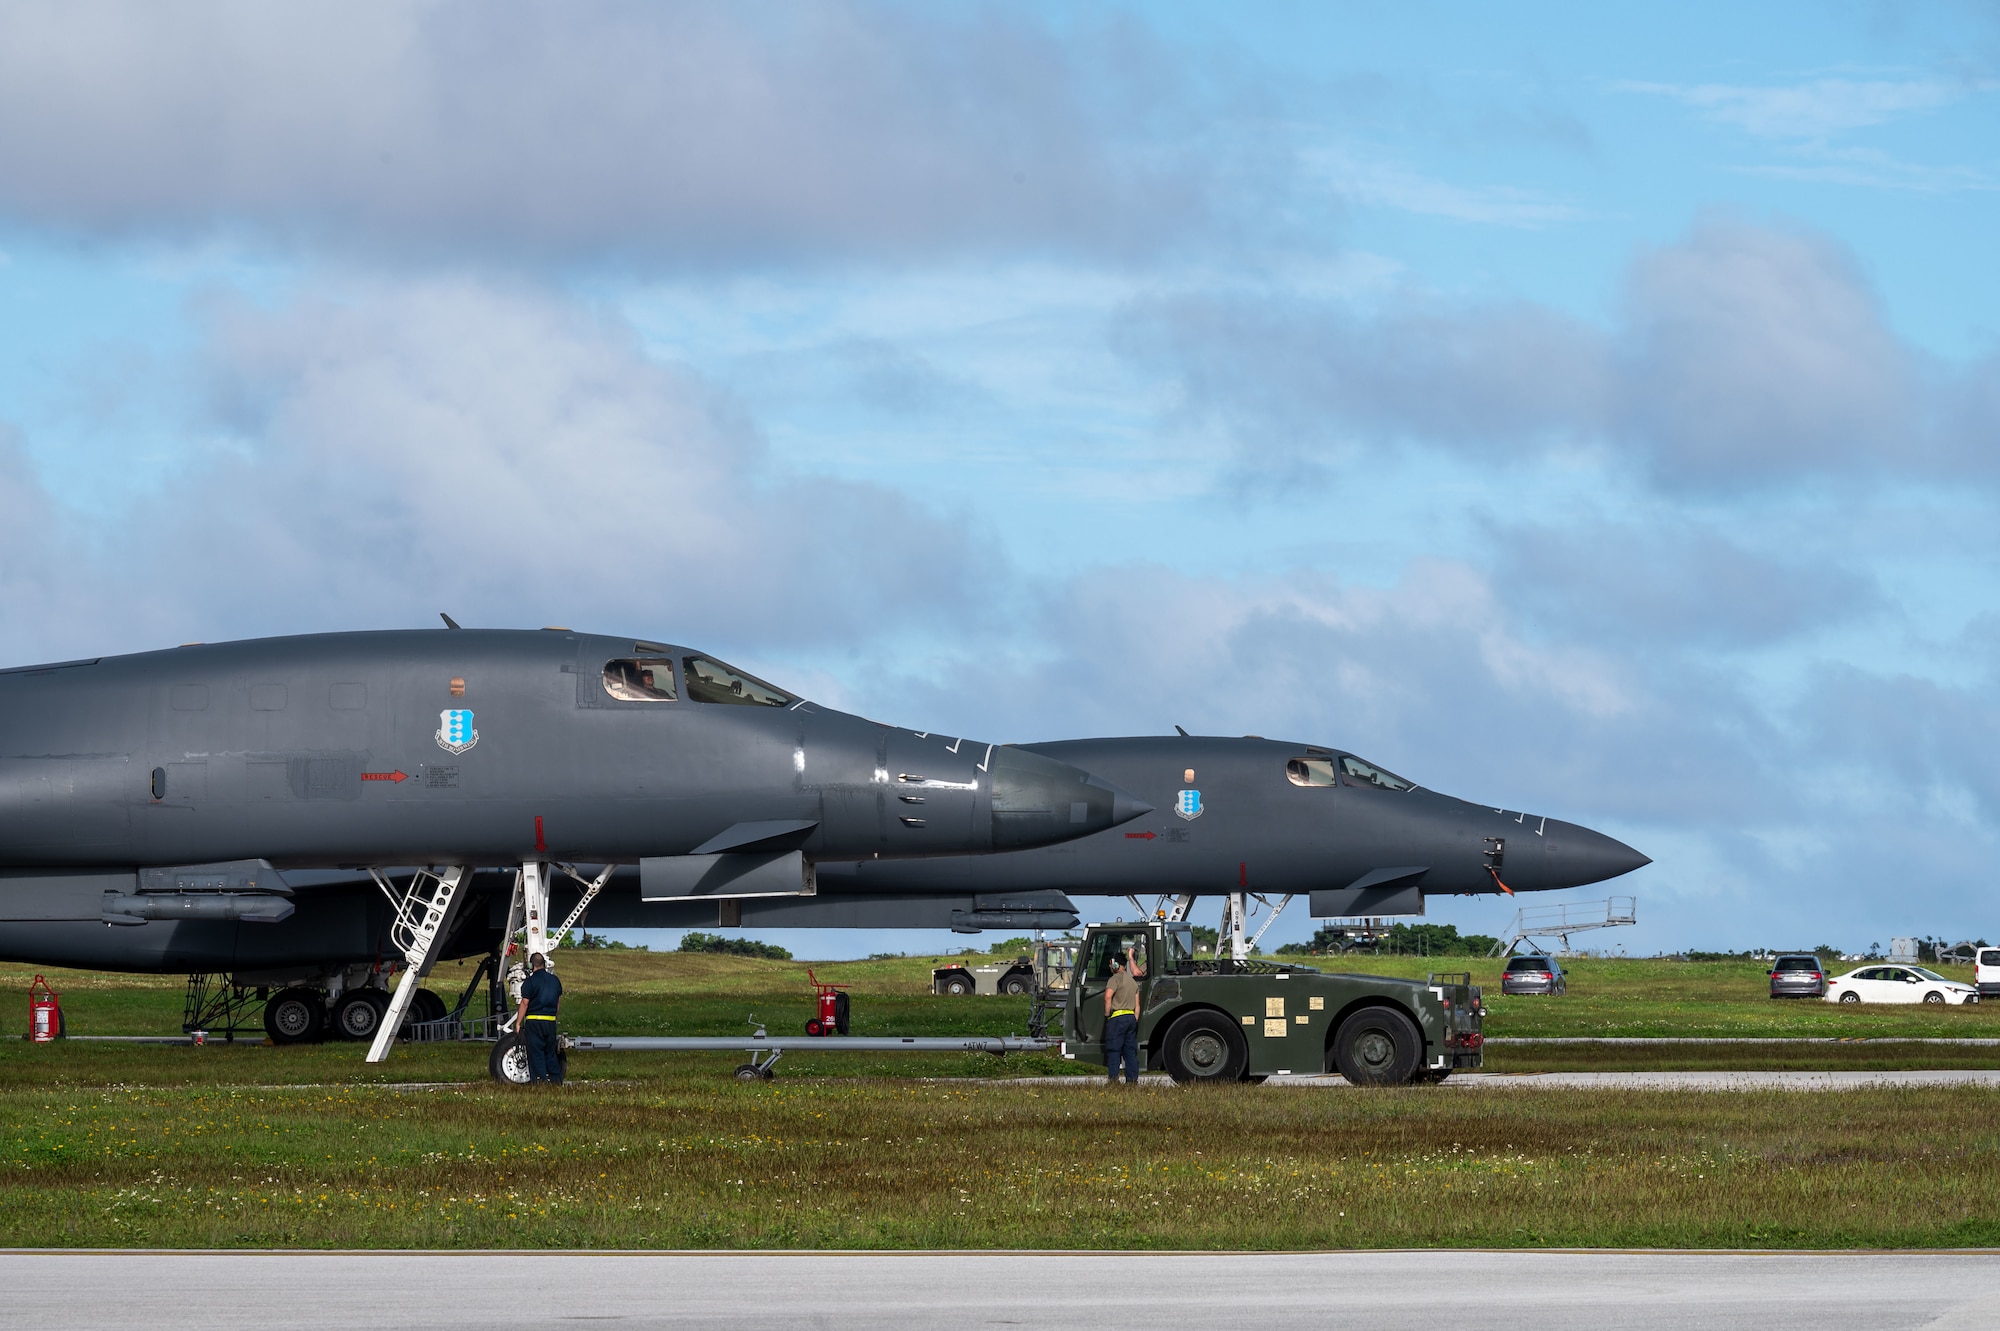 A U.S. Air Force B-1B Lancer from Ellsworth Air Force Base, S.D., is maneuvered into a parking zone at Andersen Air Force Base, Guam, during a Bomber Task Force deployment, Dec. 10, 2020. BTF supports Pacific Air Forces’ strategic deterrence mission and its commitment to the security and stability of the Indo-Pacific region. (U.S. Air Force photo by Senior Airman Tristan Day)